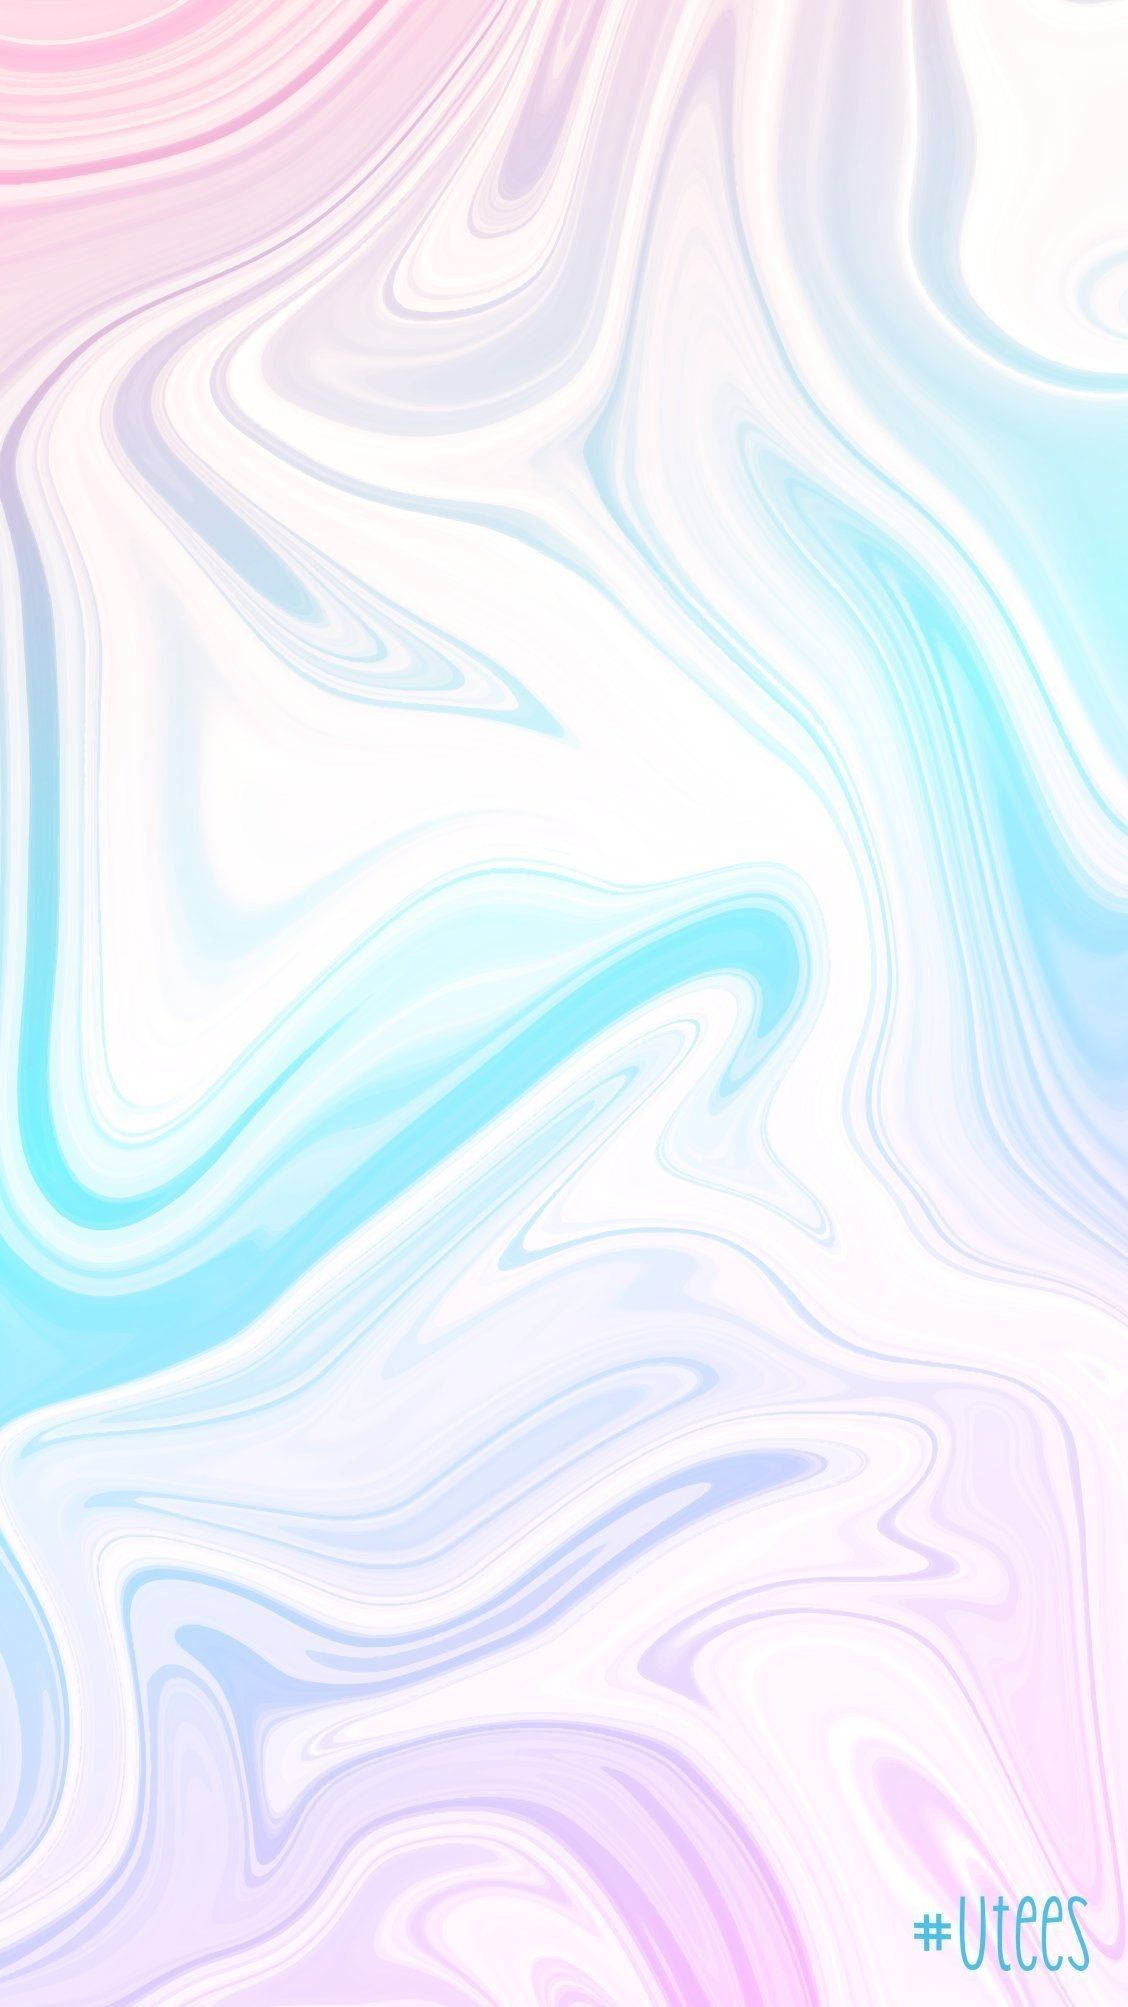 Download Aesthetic Marble In Cotton Candy Colors Wallpaper | Wallpapers.com